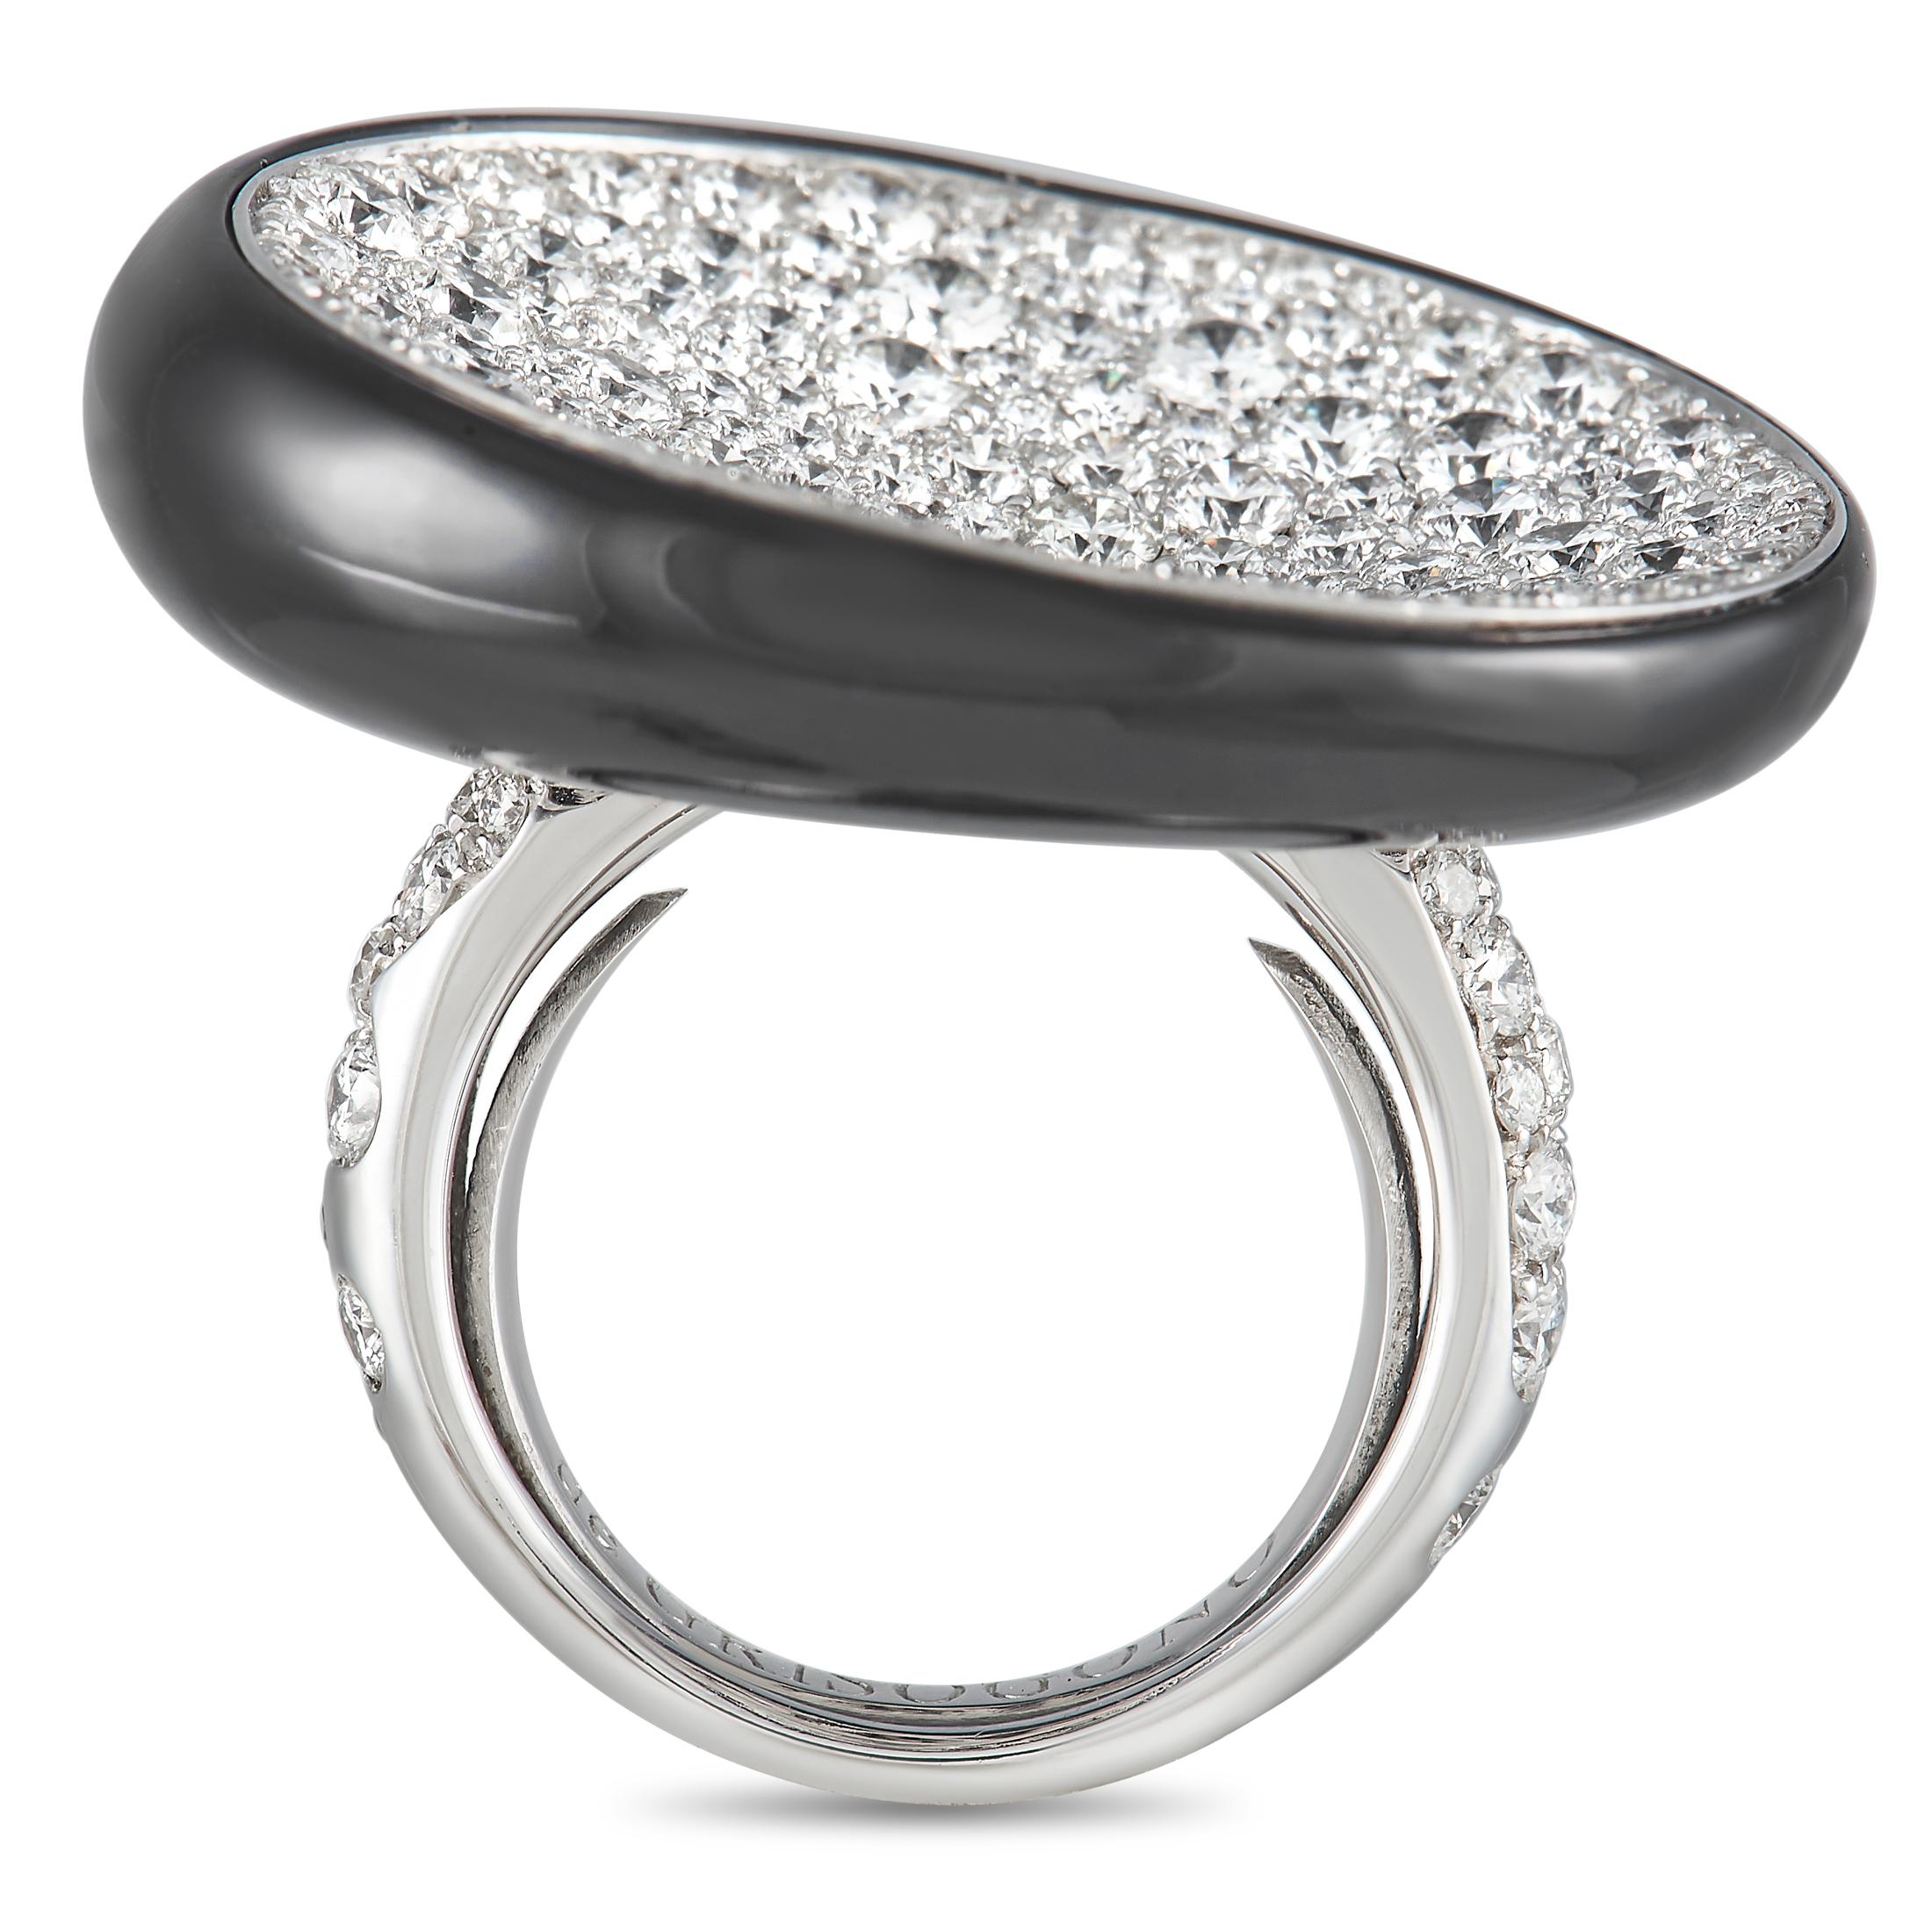 A glittering finger accessory with a truly bold personality. This diamond and onyx piece from de Grisogono features a 5mm band in 18K white gold. The shank's shoulders are traced with diamonds. Taking centerstage is an oversized black onyx in